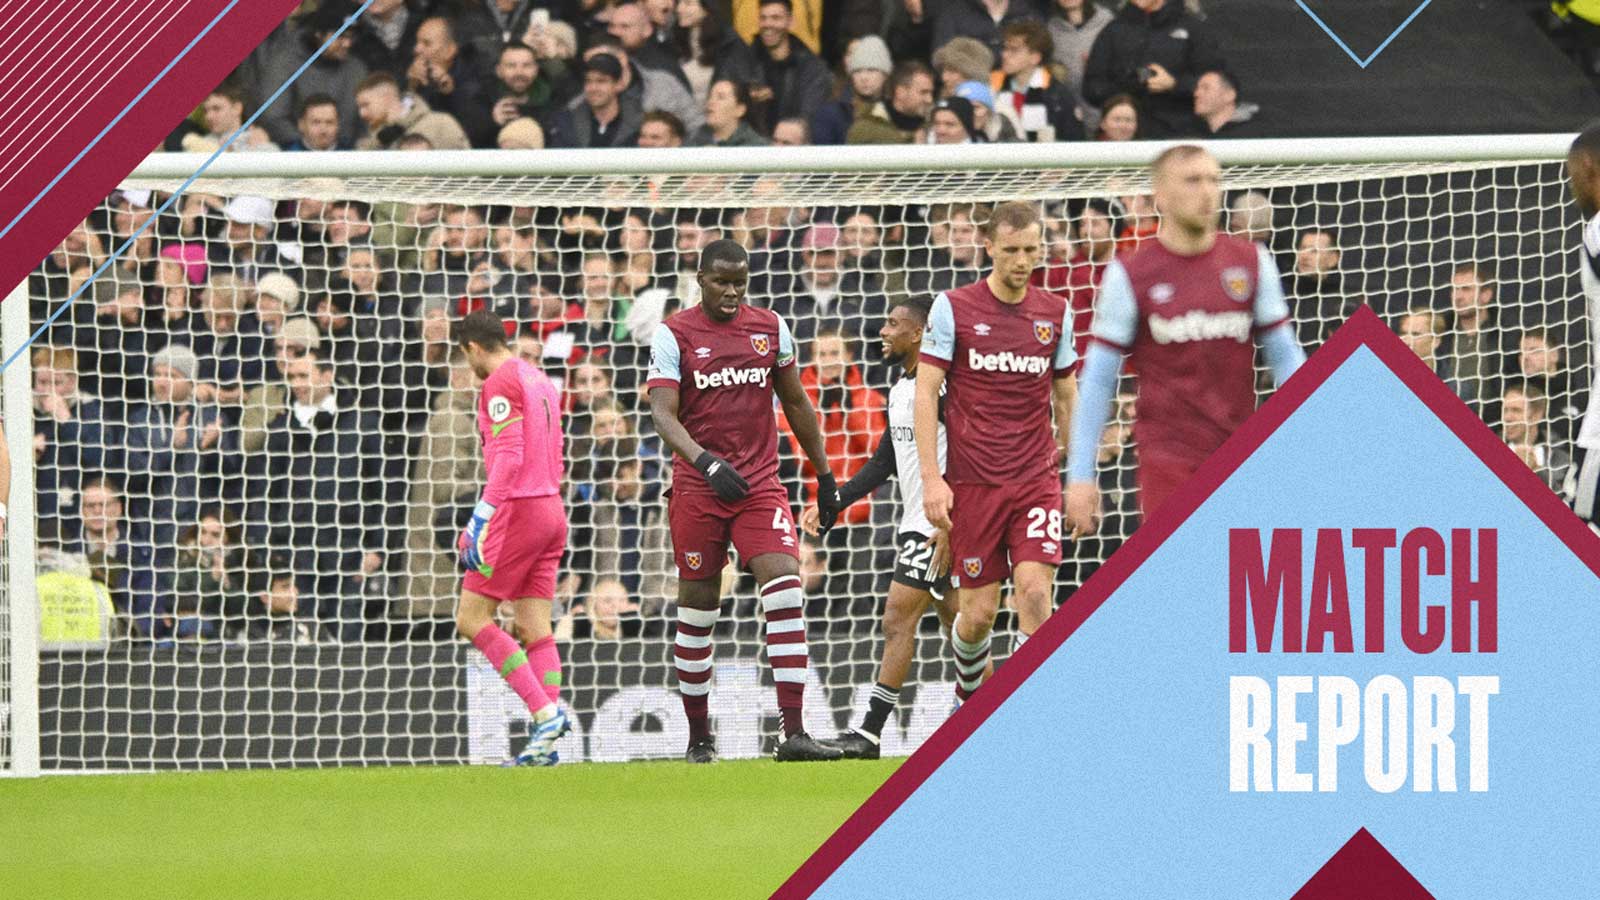 The Hammers look dejected at Fulham